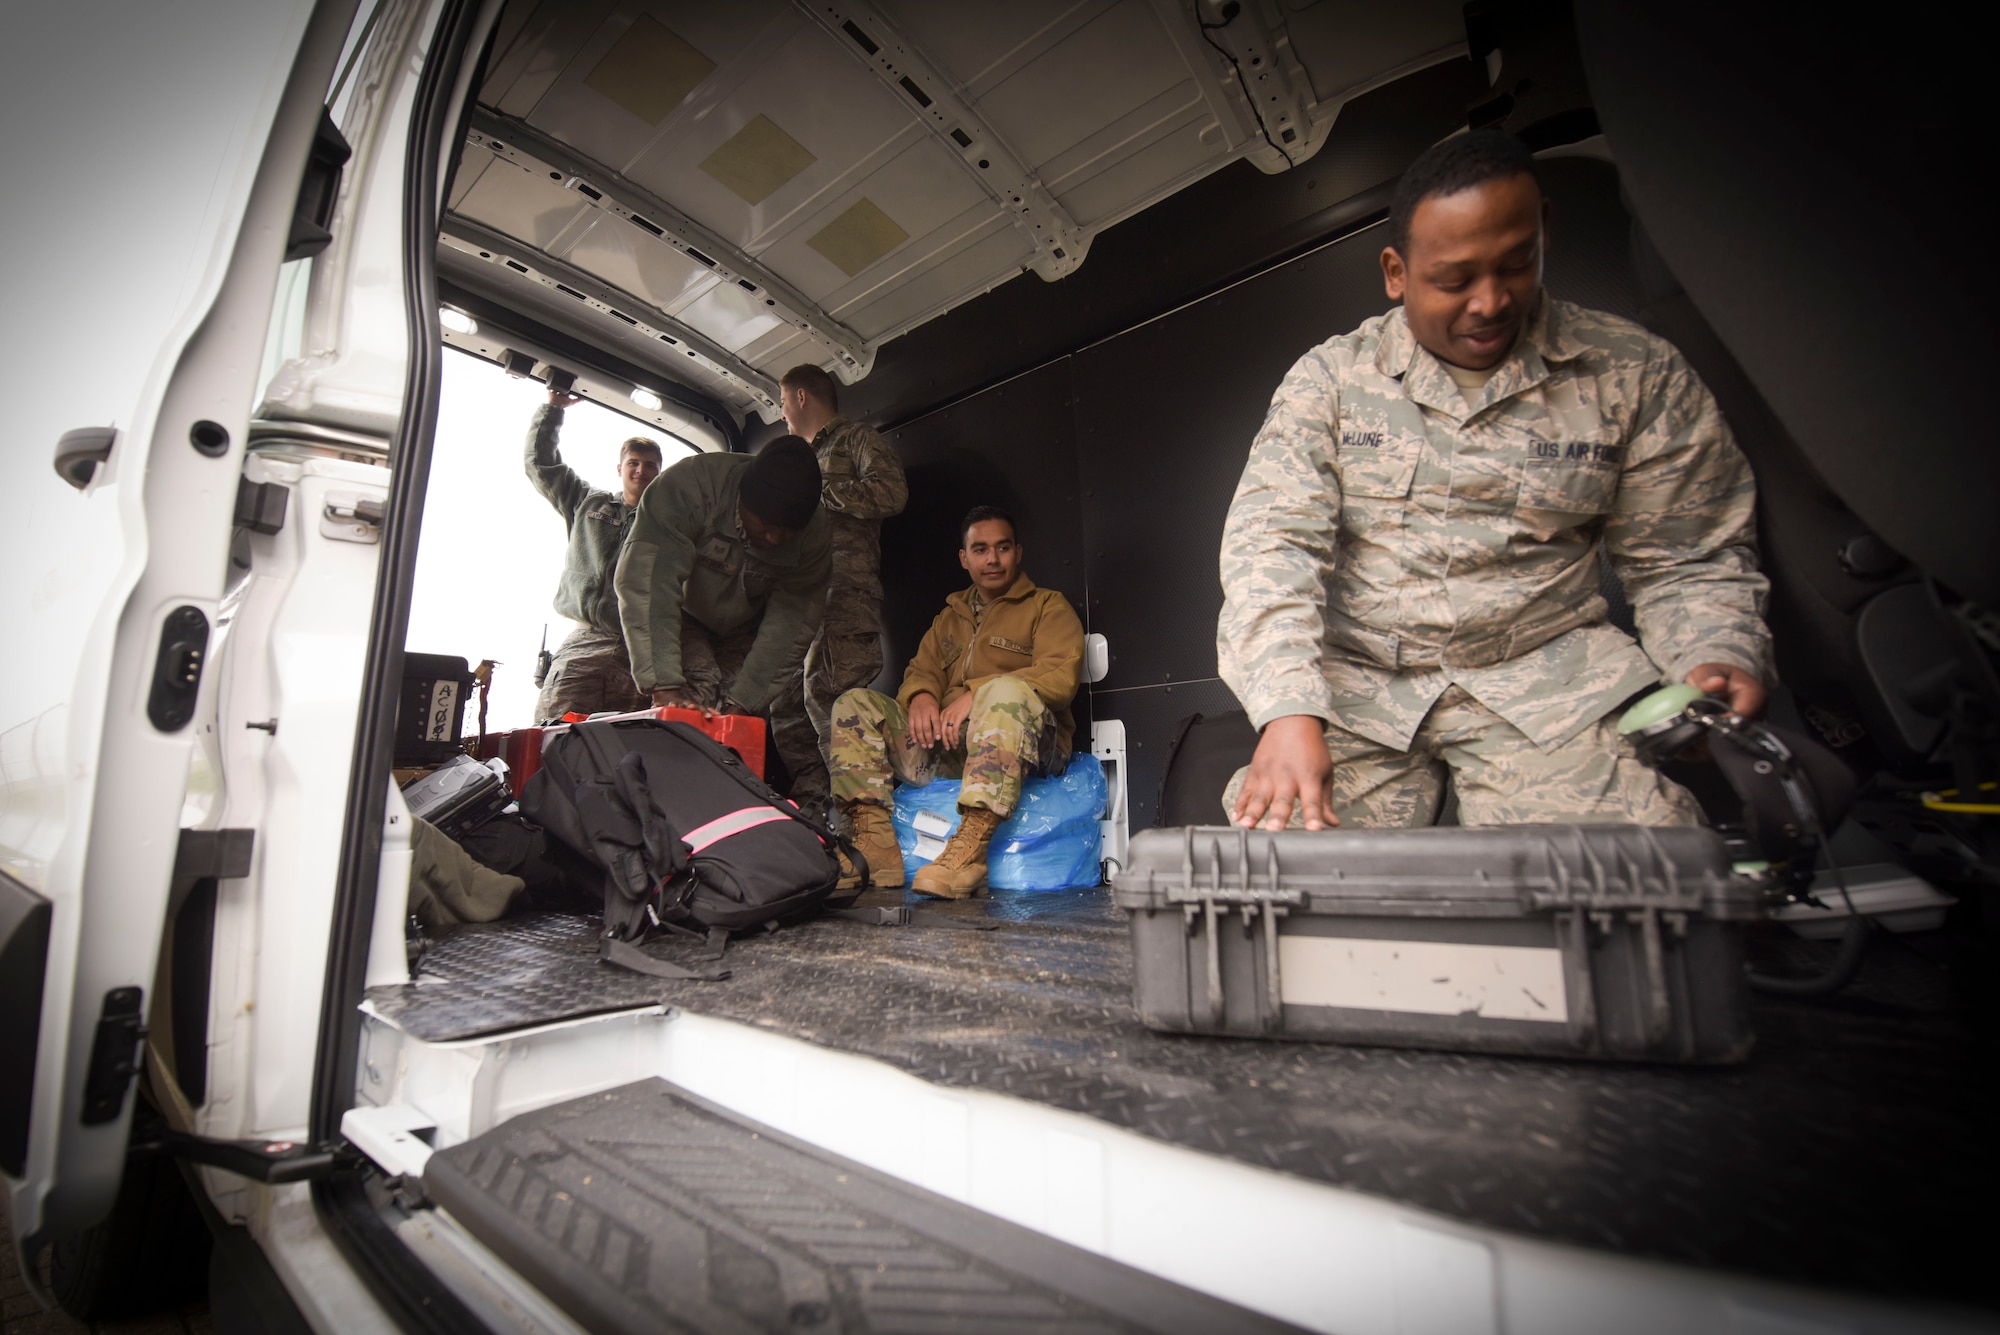 U.S. Air Force Airmen from the 100th Maintenance Squadron adjust their tools and create makeshift seats out of toolboxes in the empty bay at RAF Mildenhall, England, Oct. 28, 2019. When new trucks come to RAF Mildenhall to join the RIET ‘ready-made, integrated, expeditor truck’ line will have the updated Wi-Fi capability, gates, seats, and bay heating, and other attributes. (U.S. Air Force photo by Senior Airman Alexandria Lee)